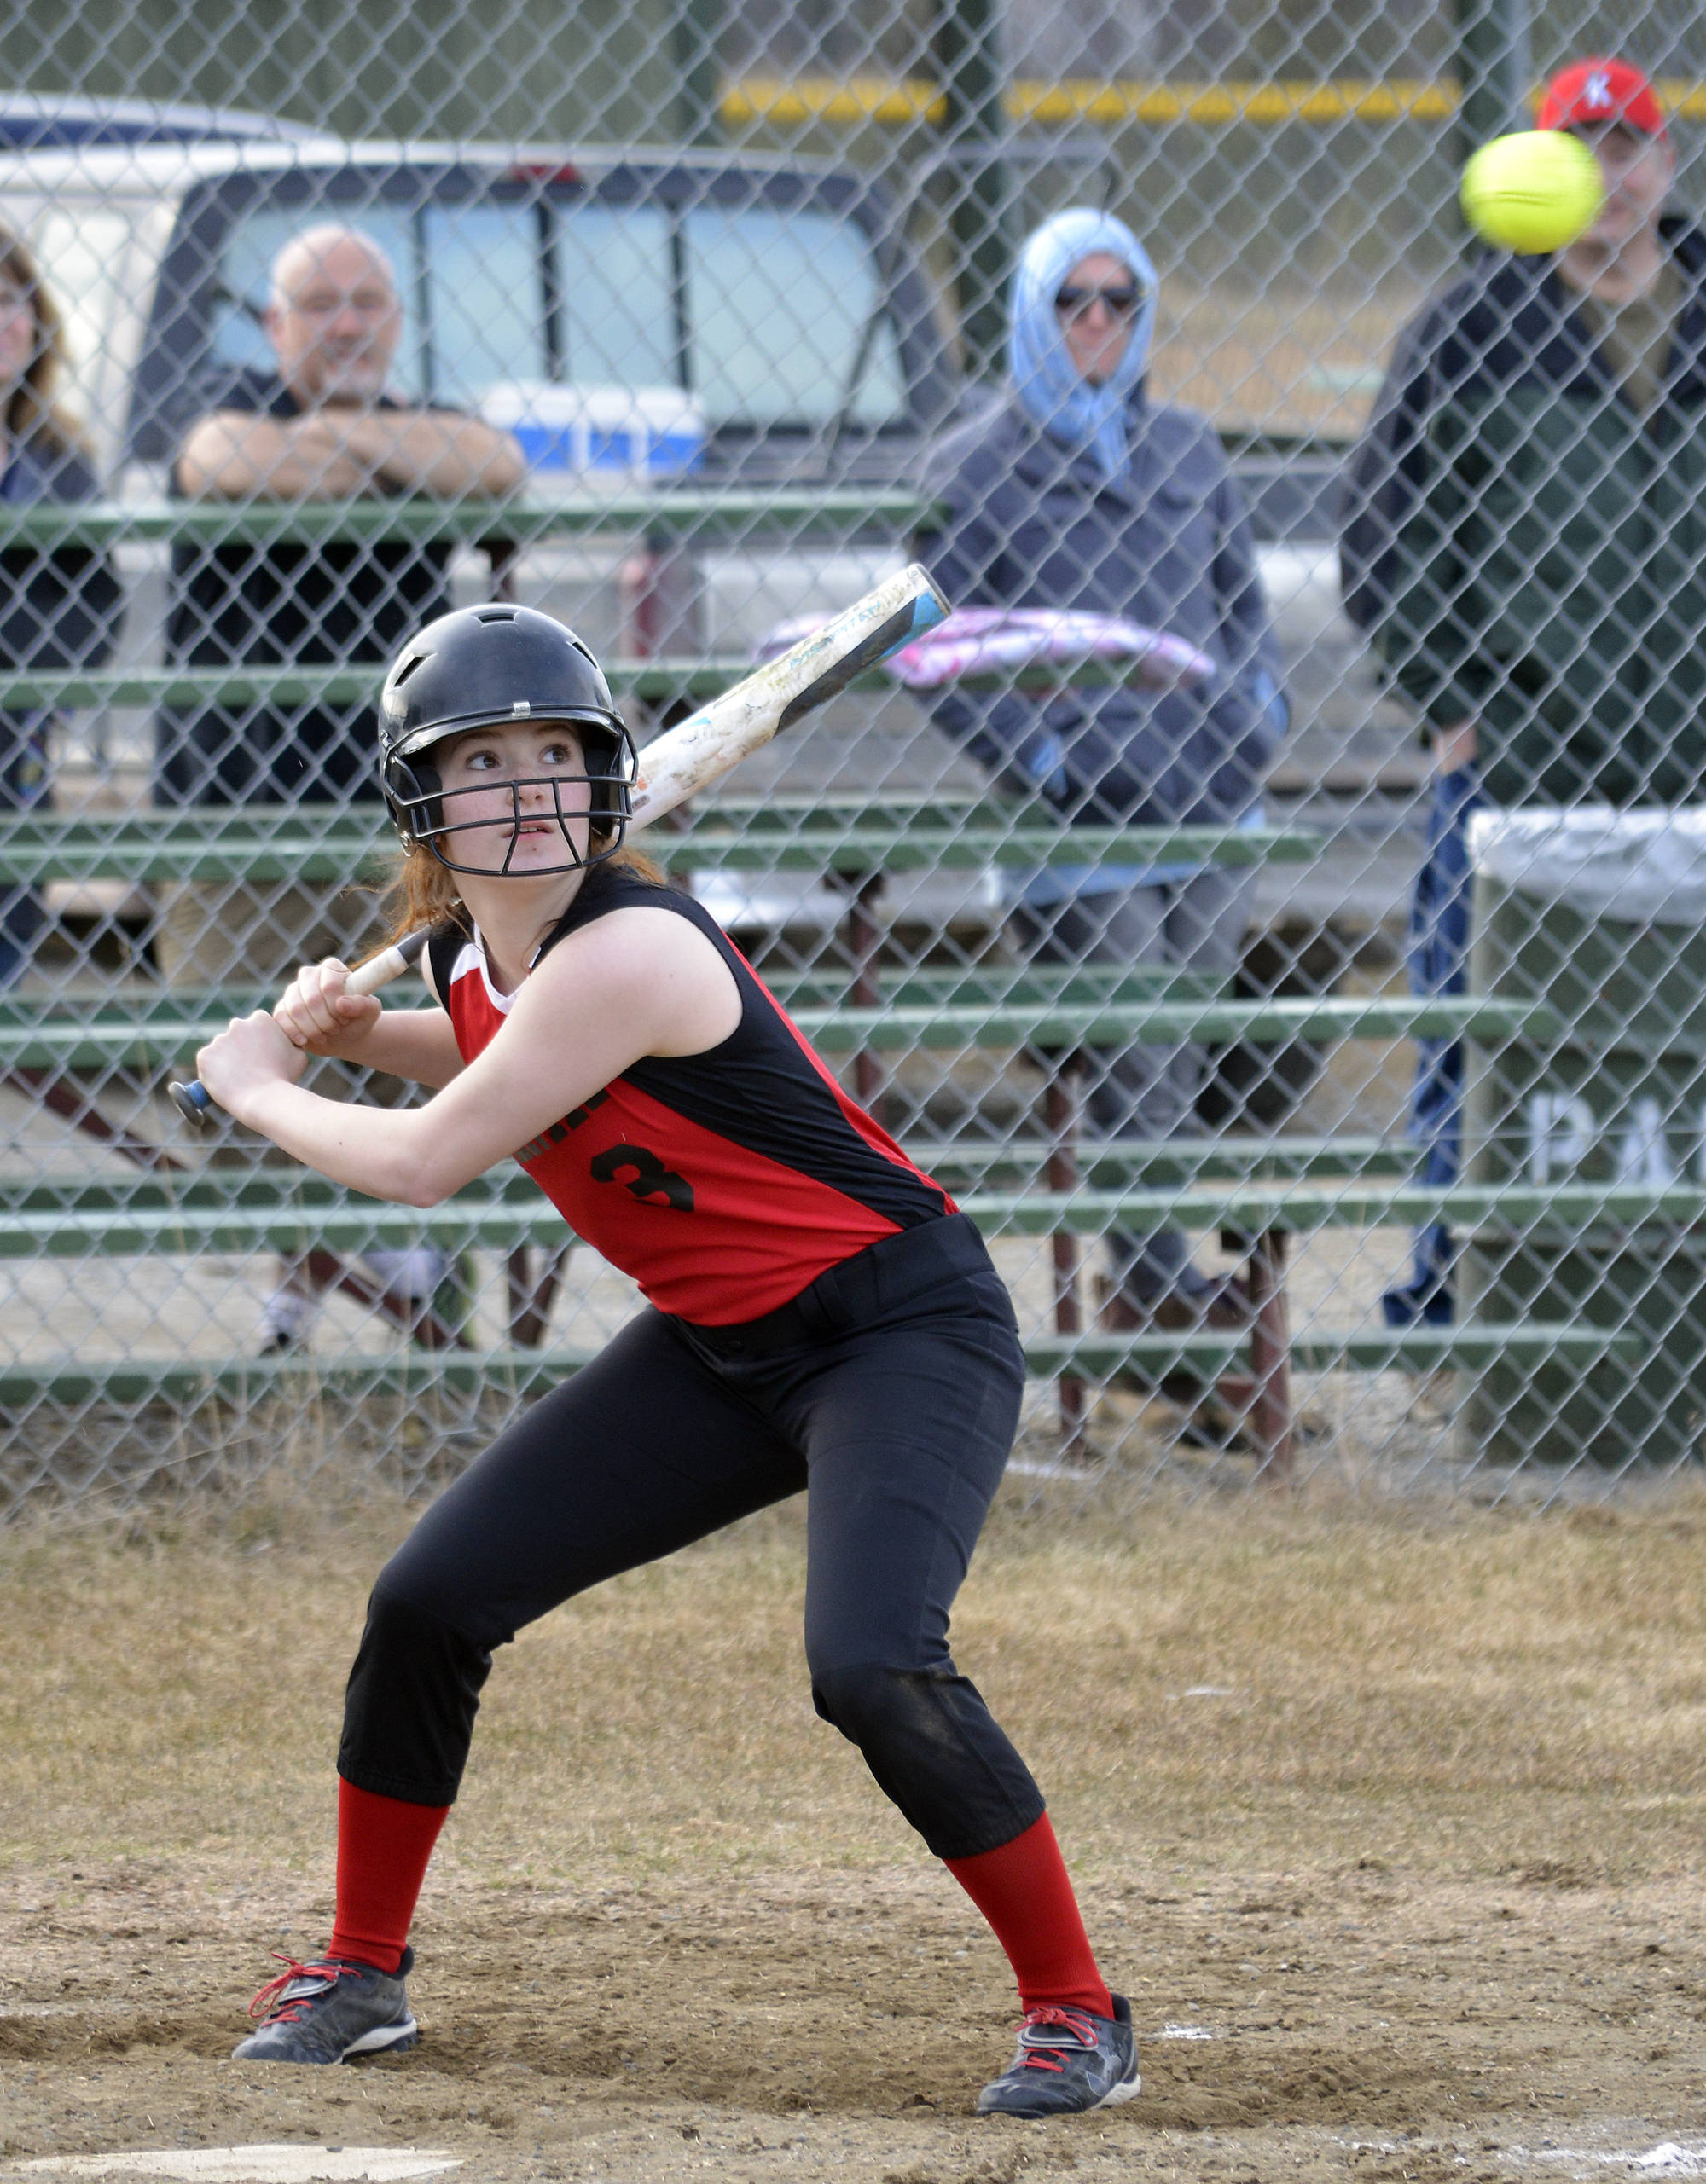 Kenai Central’s Alyssa Stanton watches a high pitch fly over her head against Palmer, Friday at Steve Shearer Memorial Ball Park in Kenai. (Photo by Joey Klecka/Peninsula Clarion)